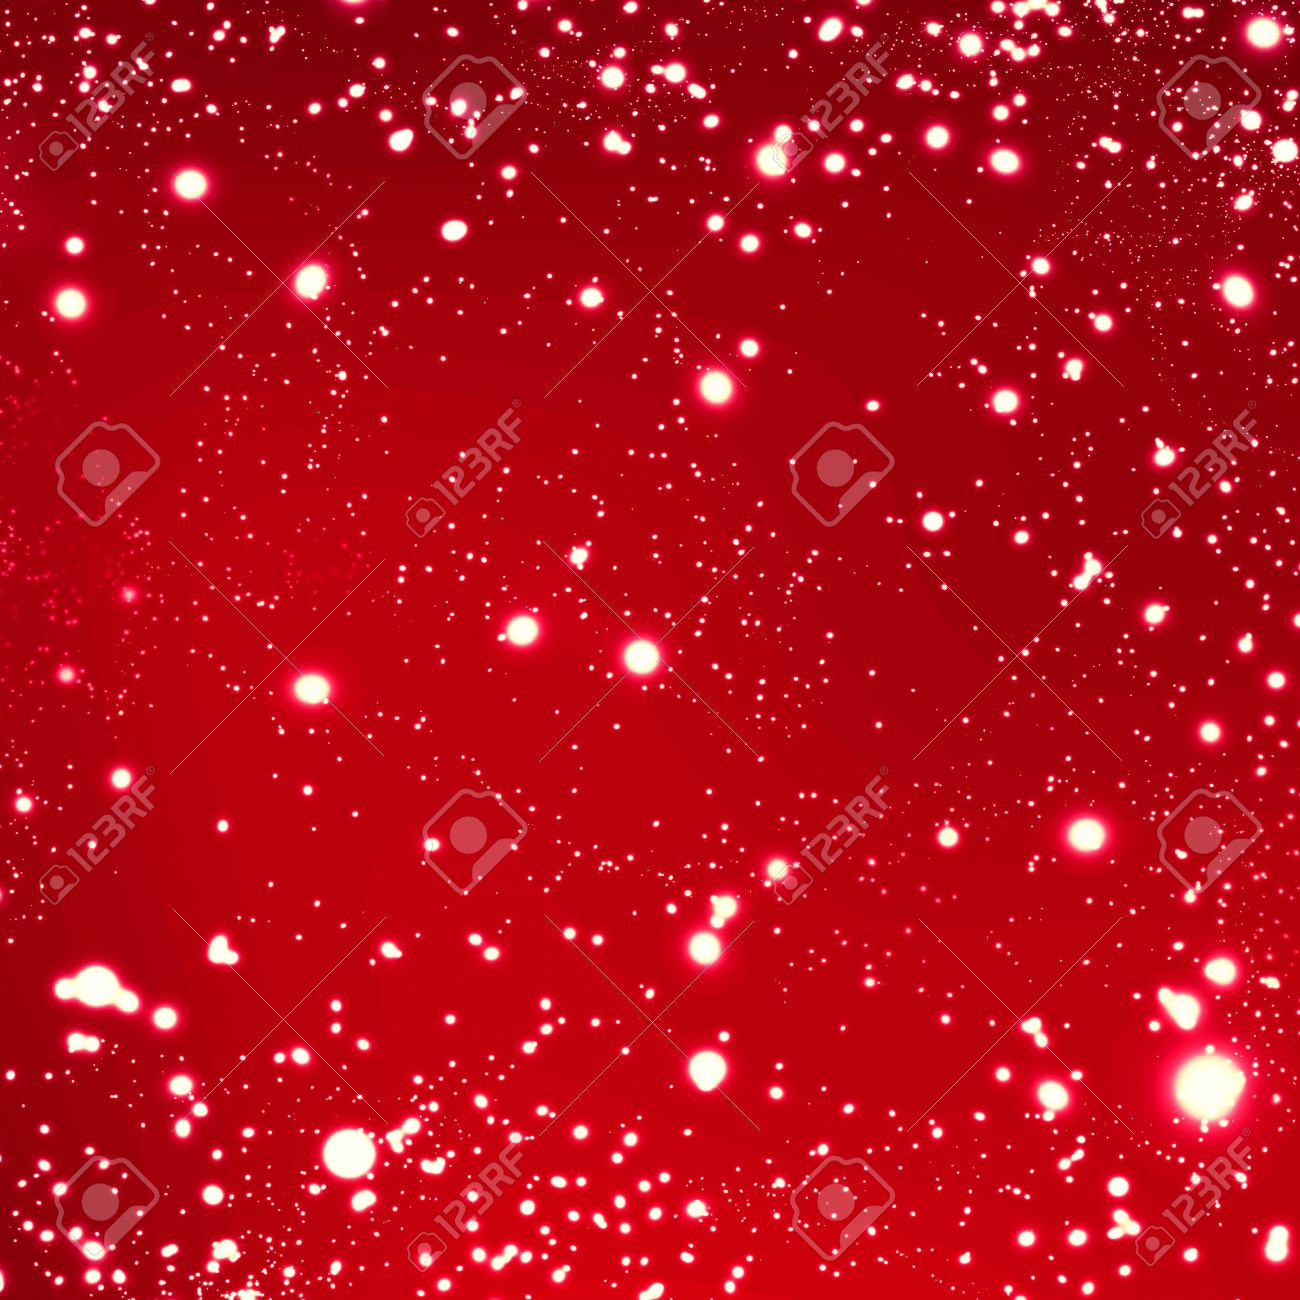 Abstract Red Christmas Background With Golden Lights Festive